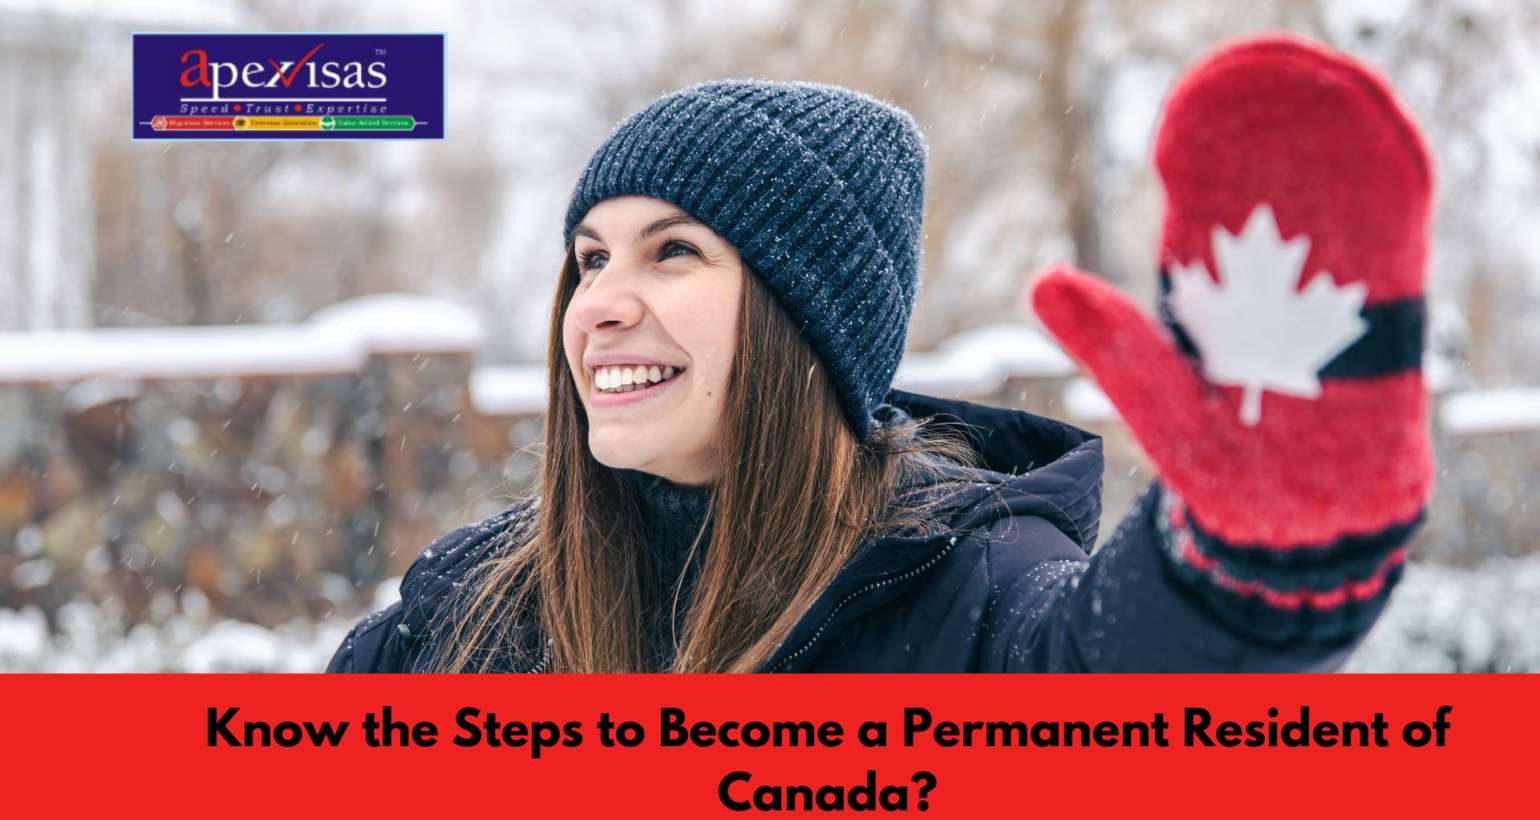 Know the Steps to Become a Permanent Resident of Canada?